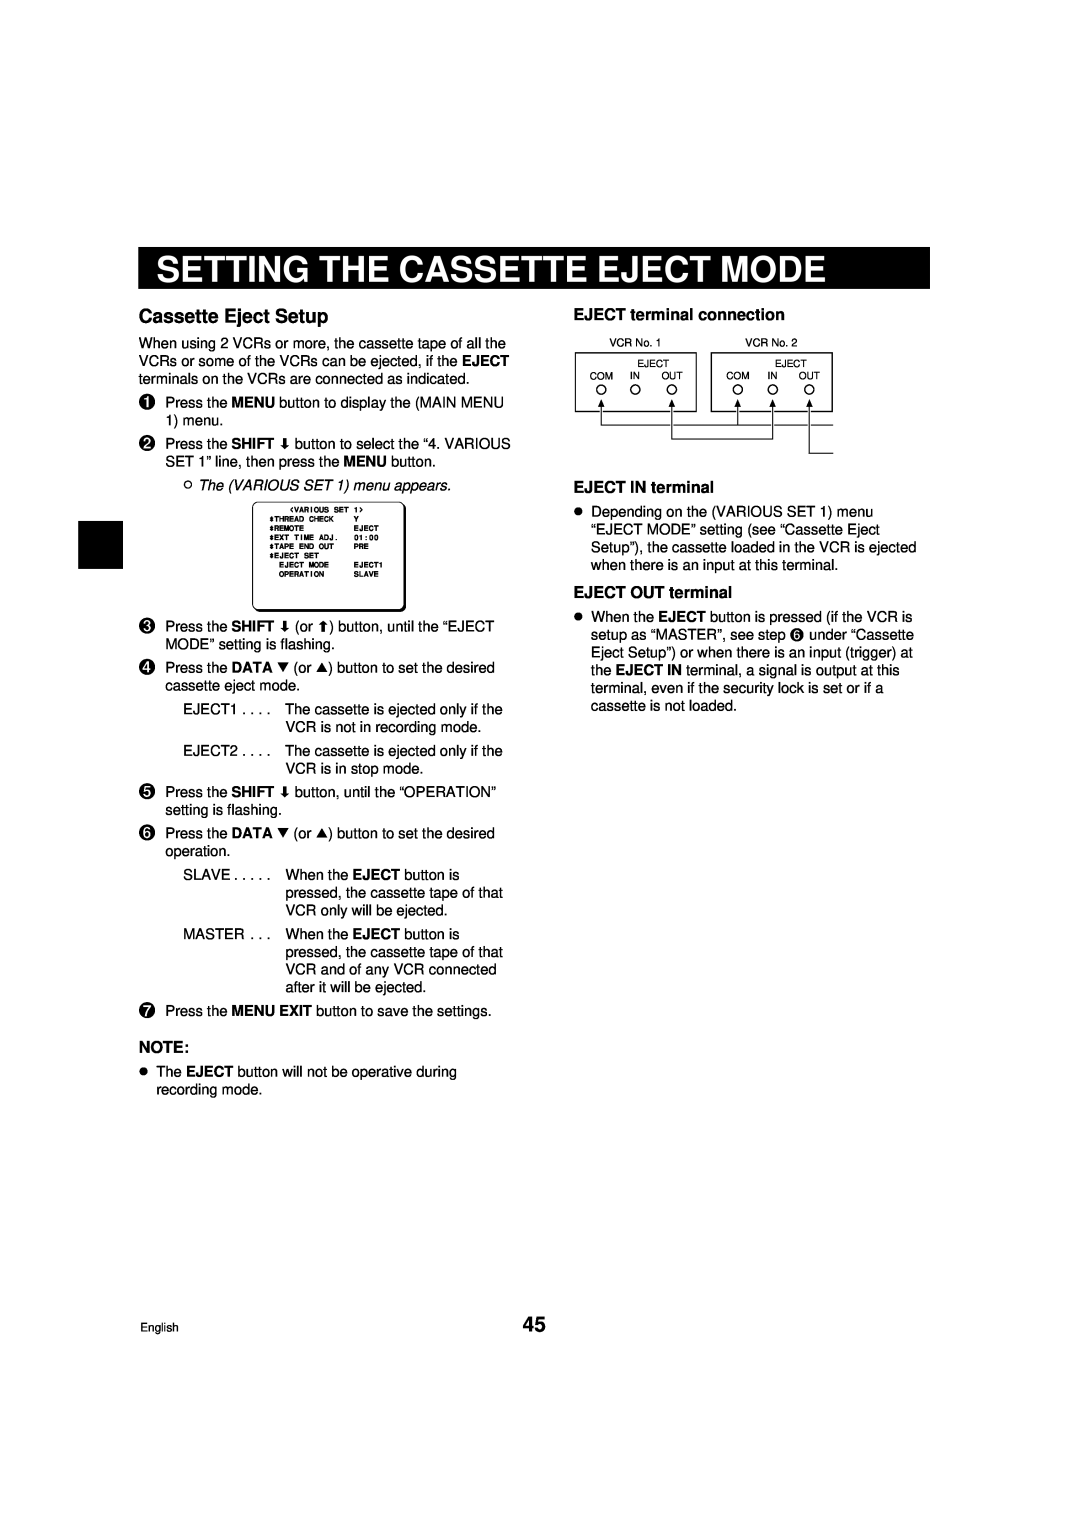 Sanyo DTL-4800 Setting The Cassette Eject Mode, Cassette Eject Setup, EJECT terminal connection, EJECT IN terminal 